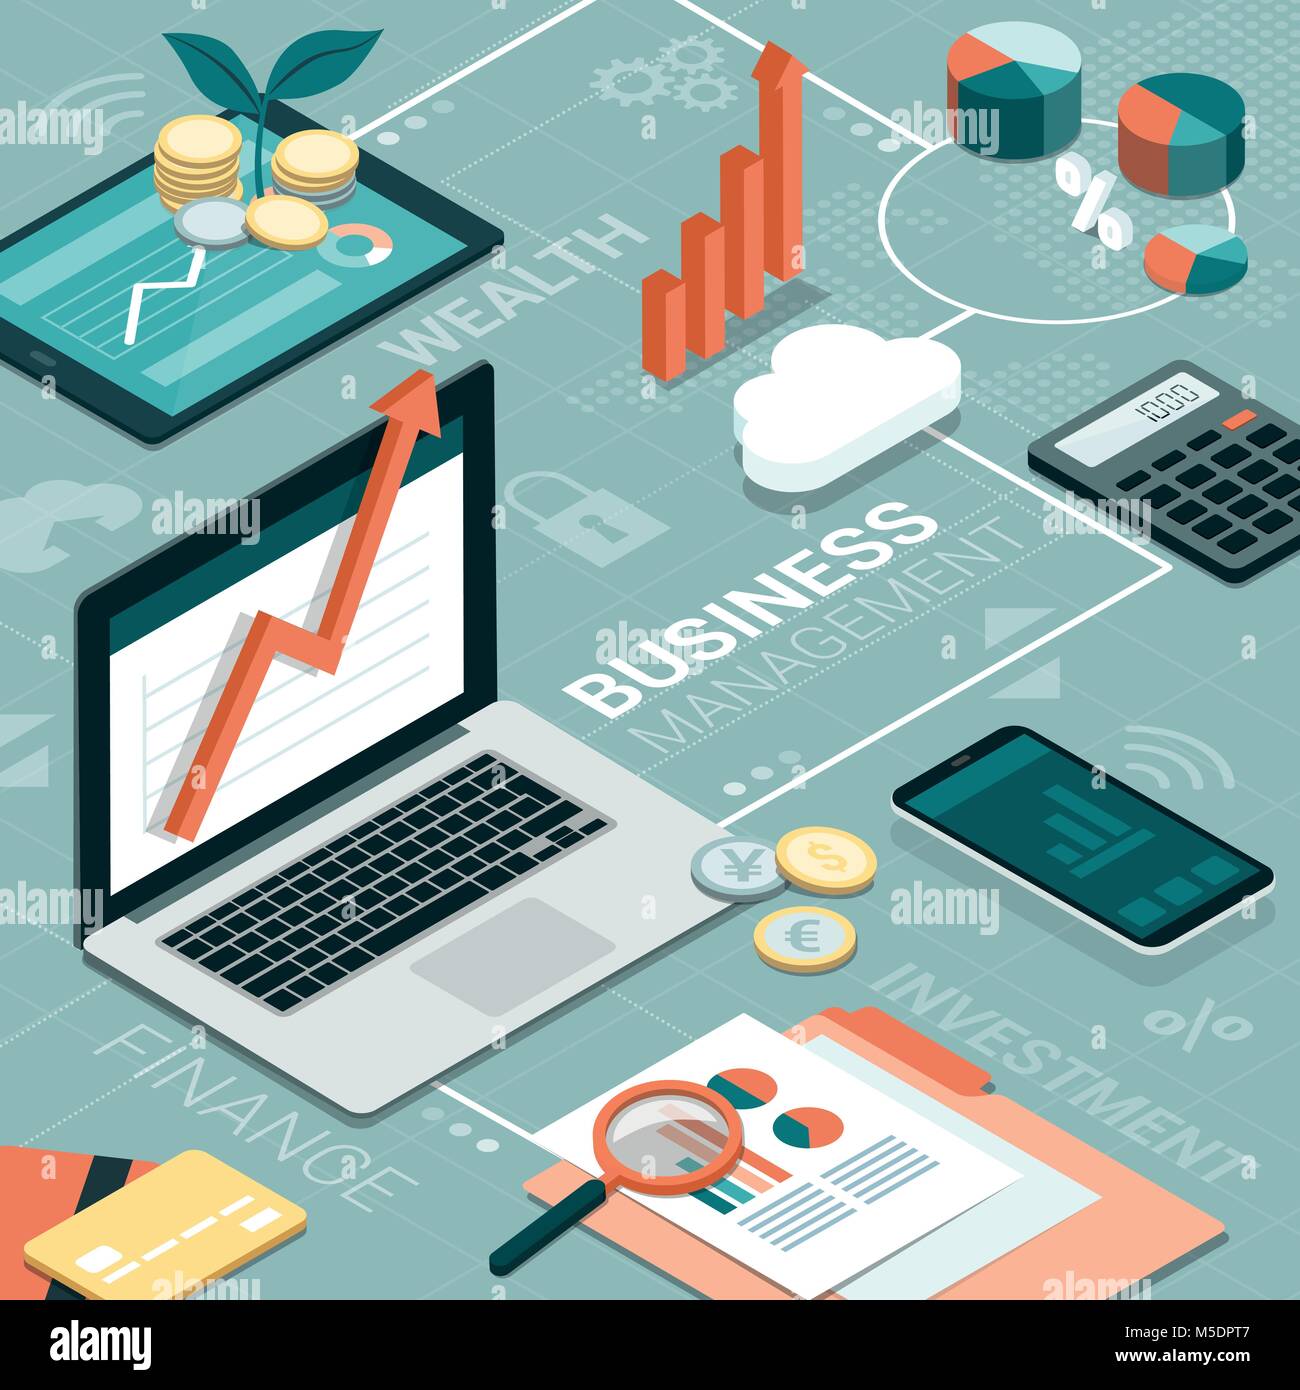 Laptop, tablet and smartphone on a corporate desktop and finance concepts: business management and investments Stock Vector